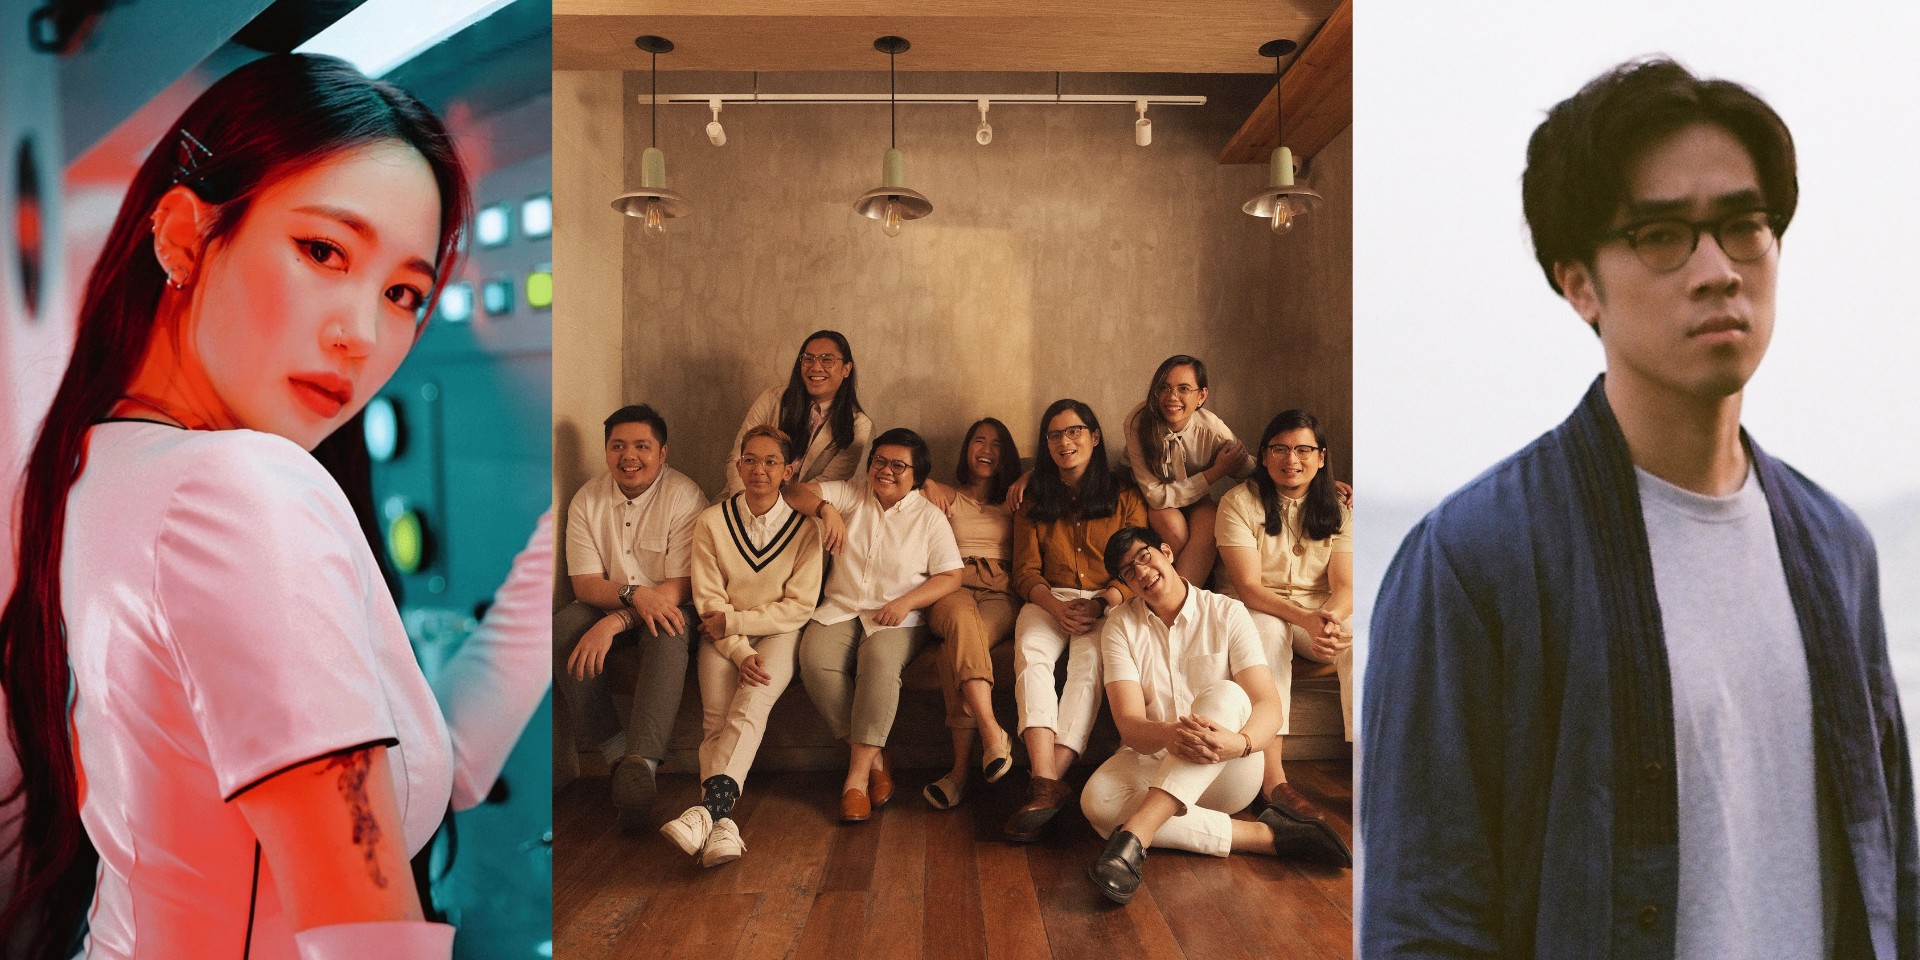 Ben&Ben, Charlie Lim, Jamie, and more to perform at ROUND Festival 2020